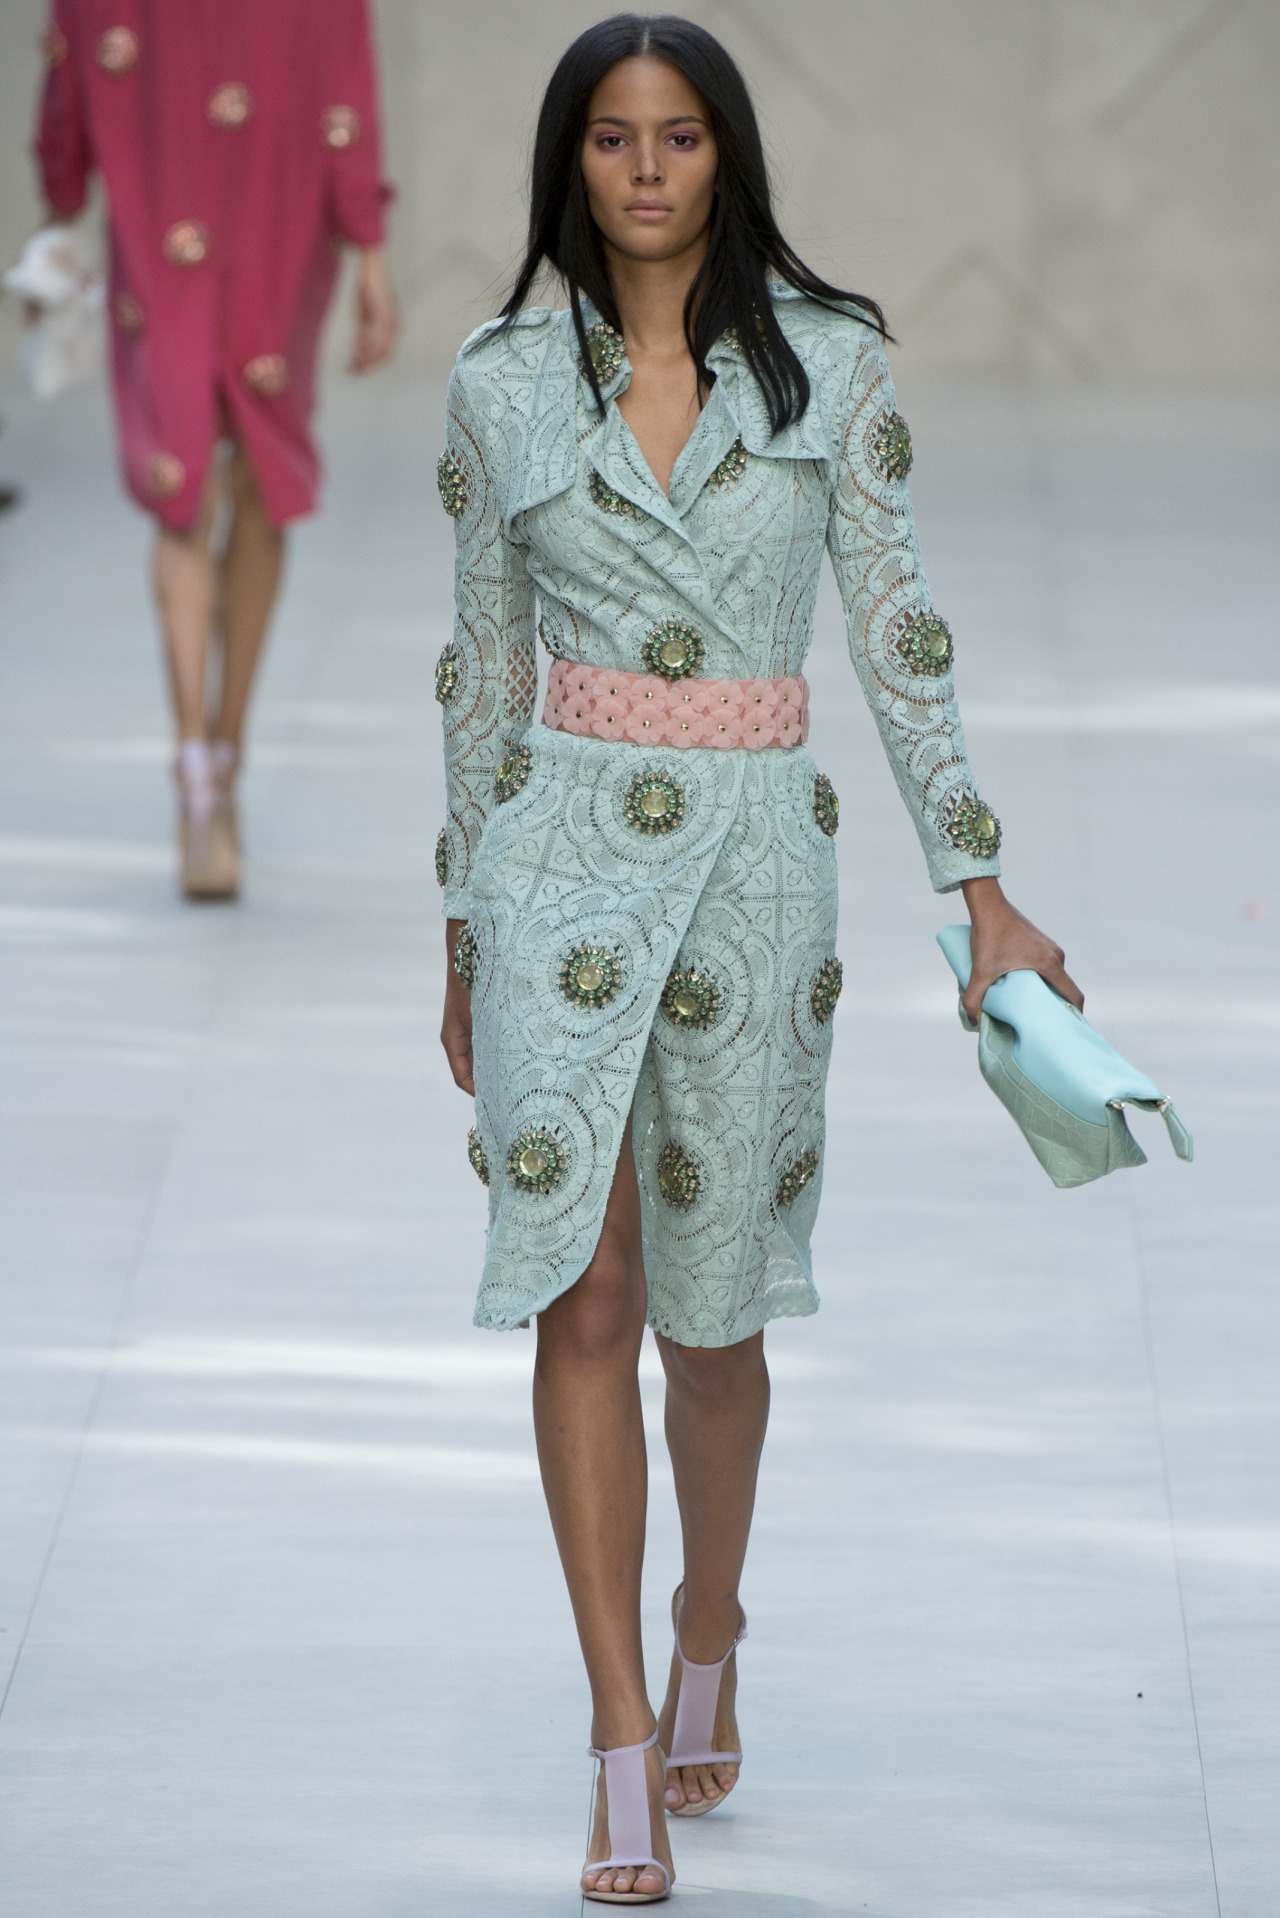 <br /><br /><br /><br /> Kyra Green for Burberry Prorsum Spring 2014.<br /><br /><br /><br /> 